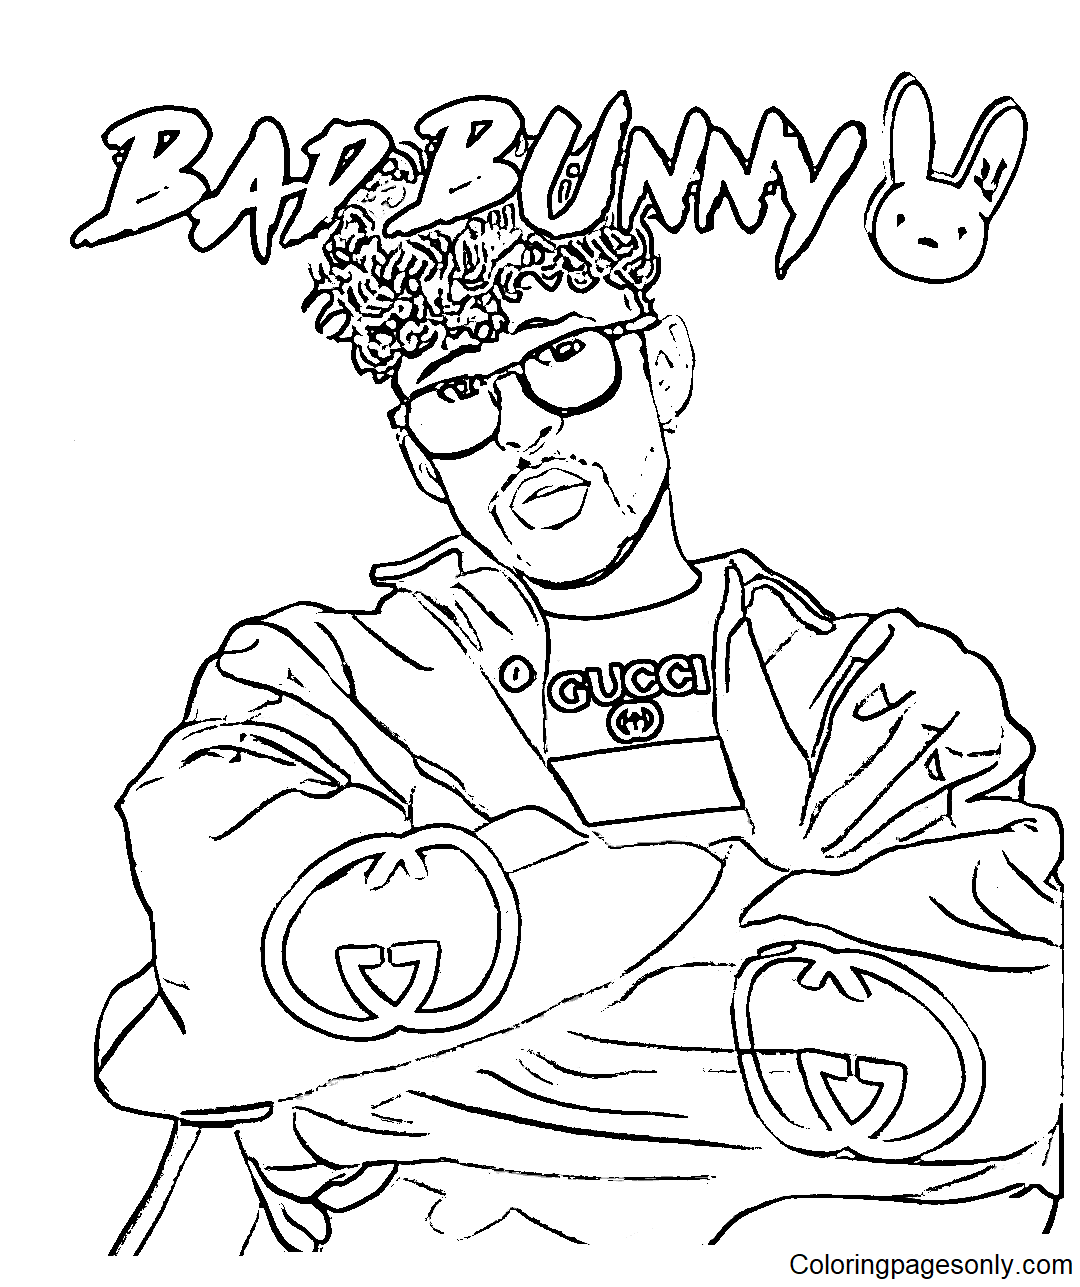 Bad Bunny Rapper Singer Coloring Pages